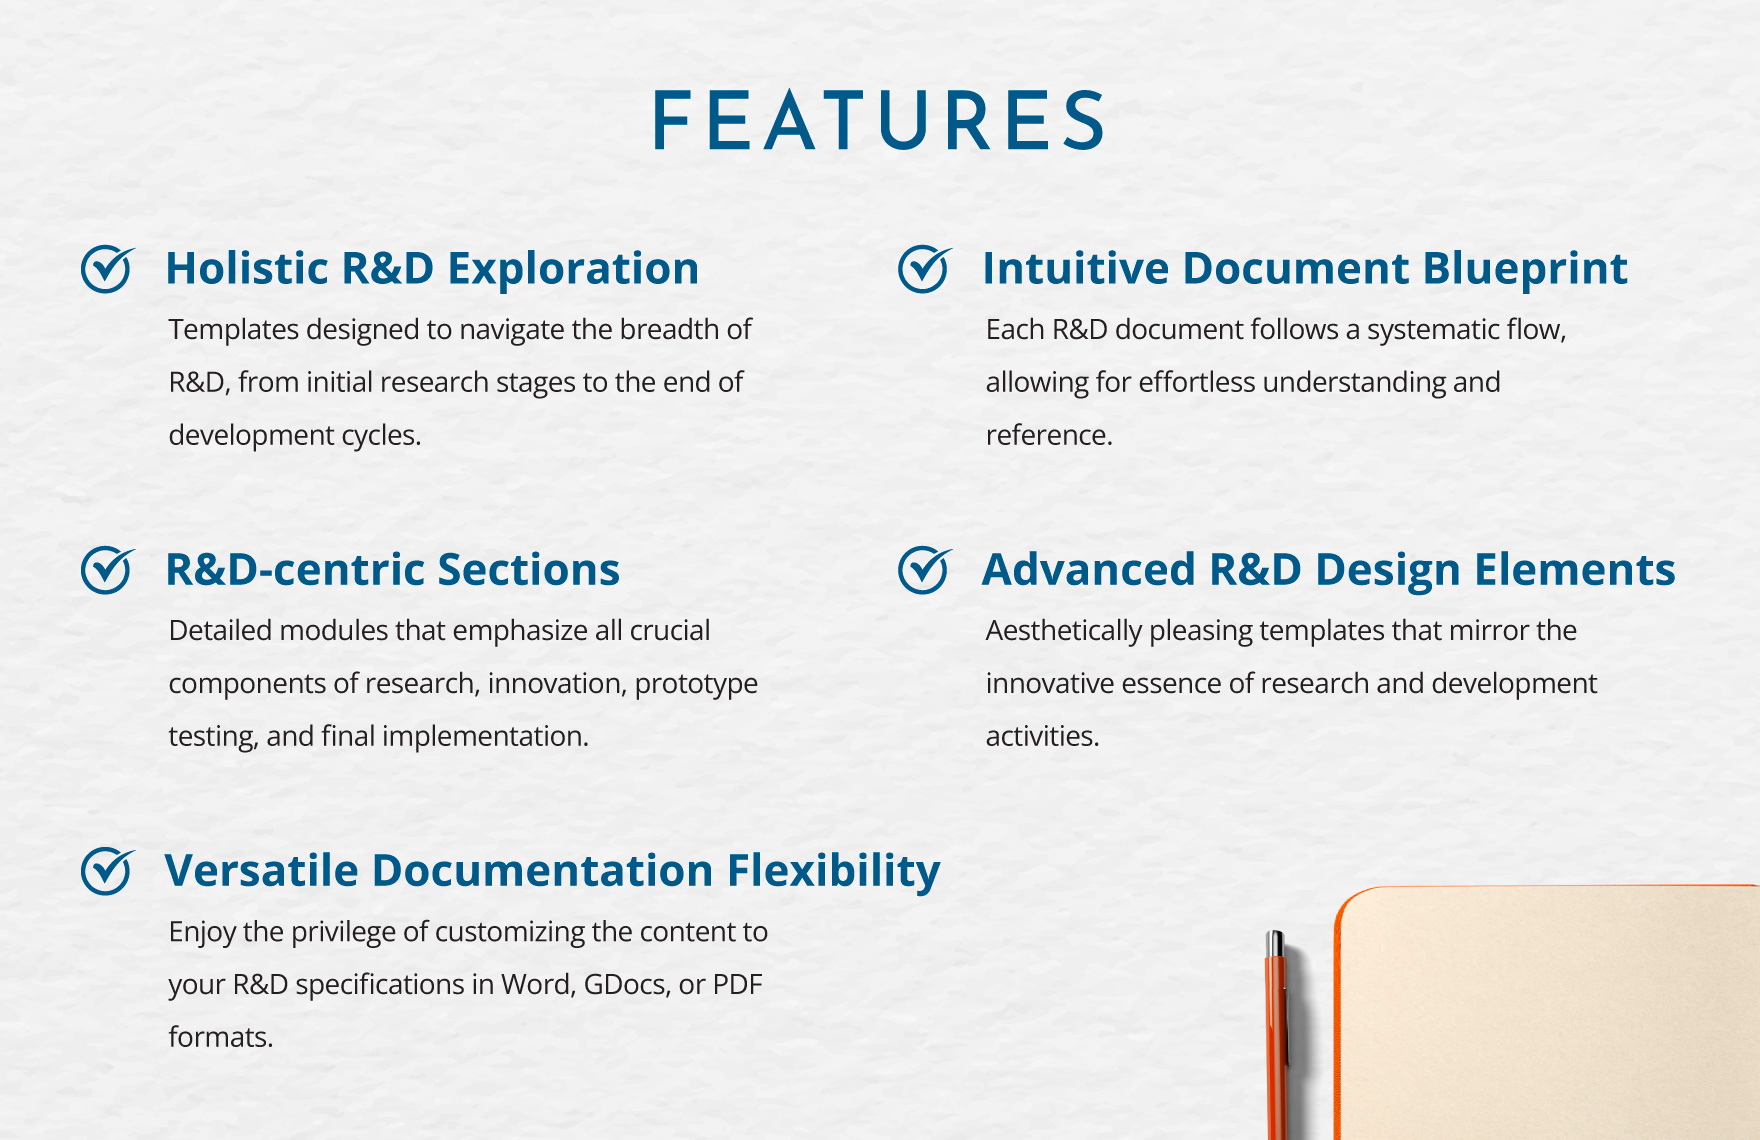 IT R&D Collaboration Agreement Template